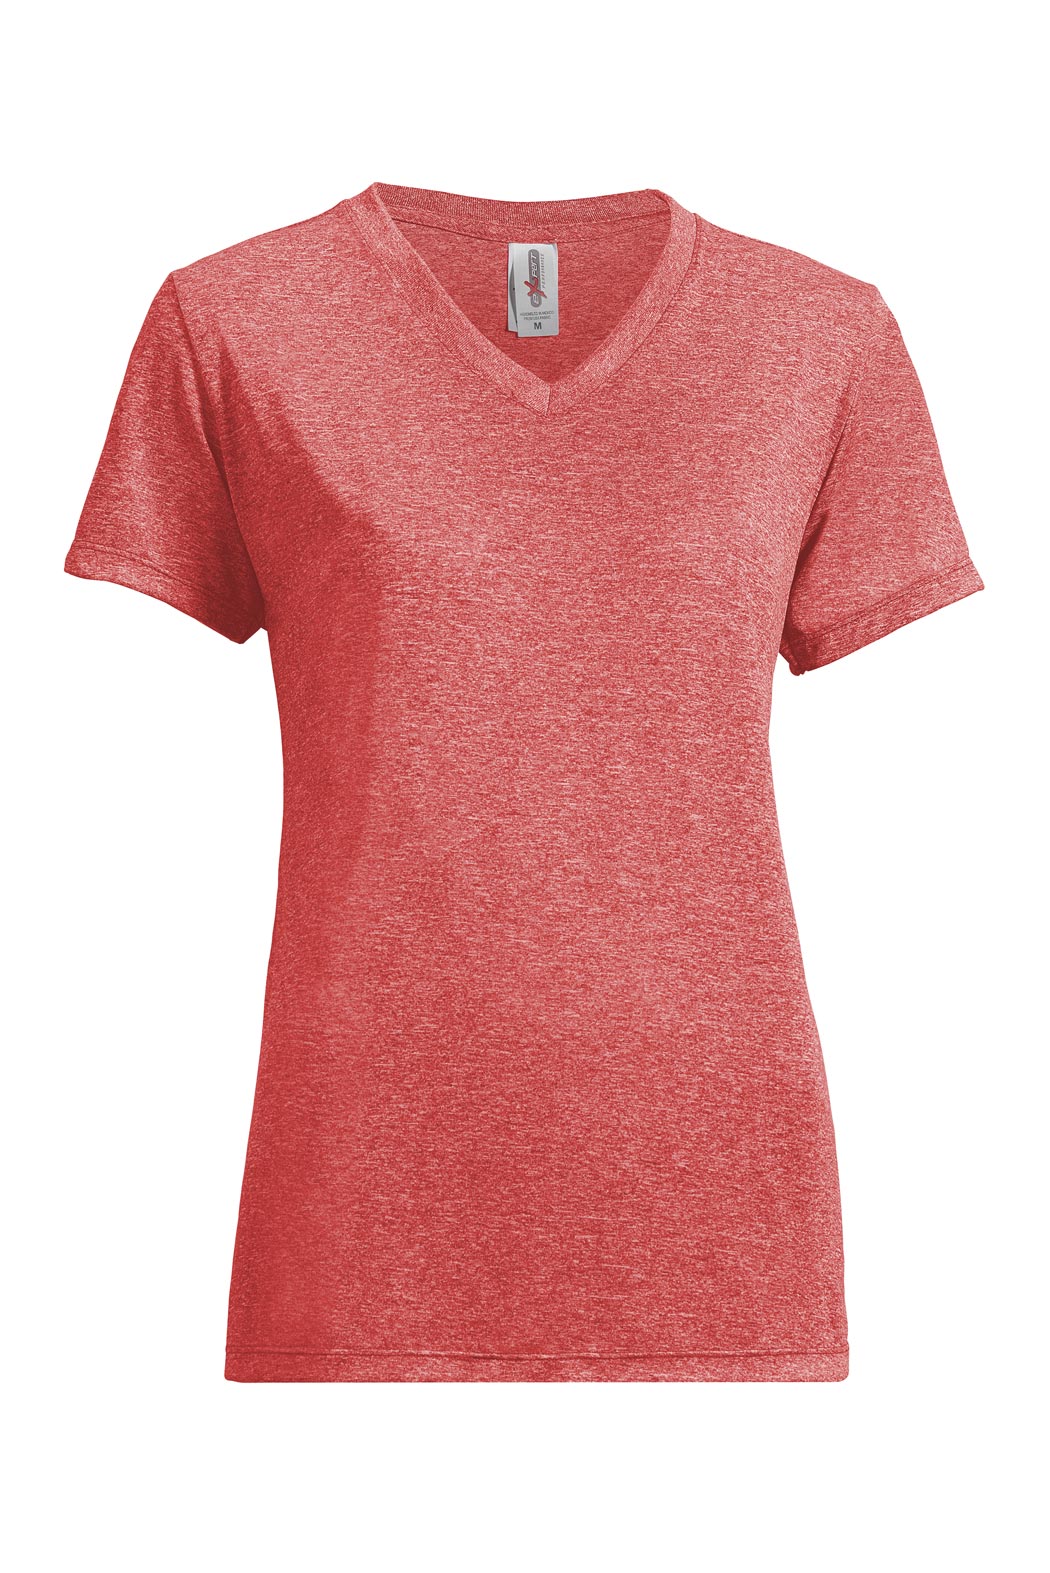 Expert Brand Wholesale Blank Active Tee Women's Heather Red#heather-red